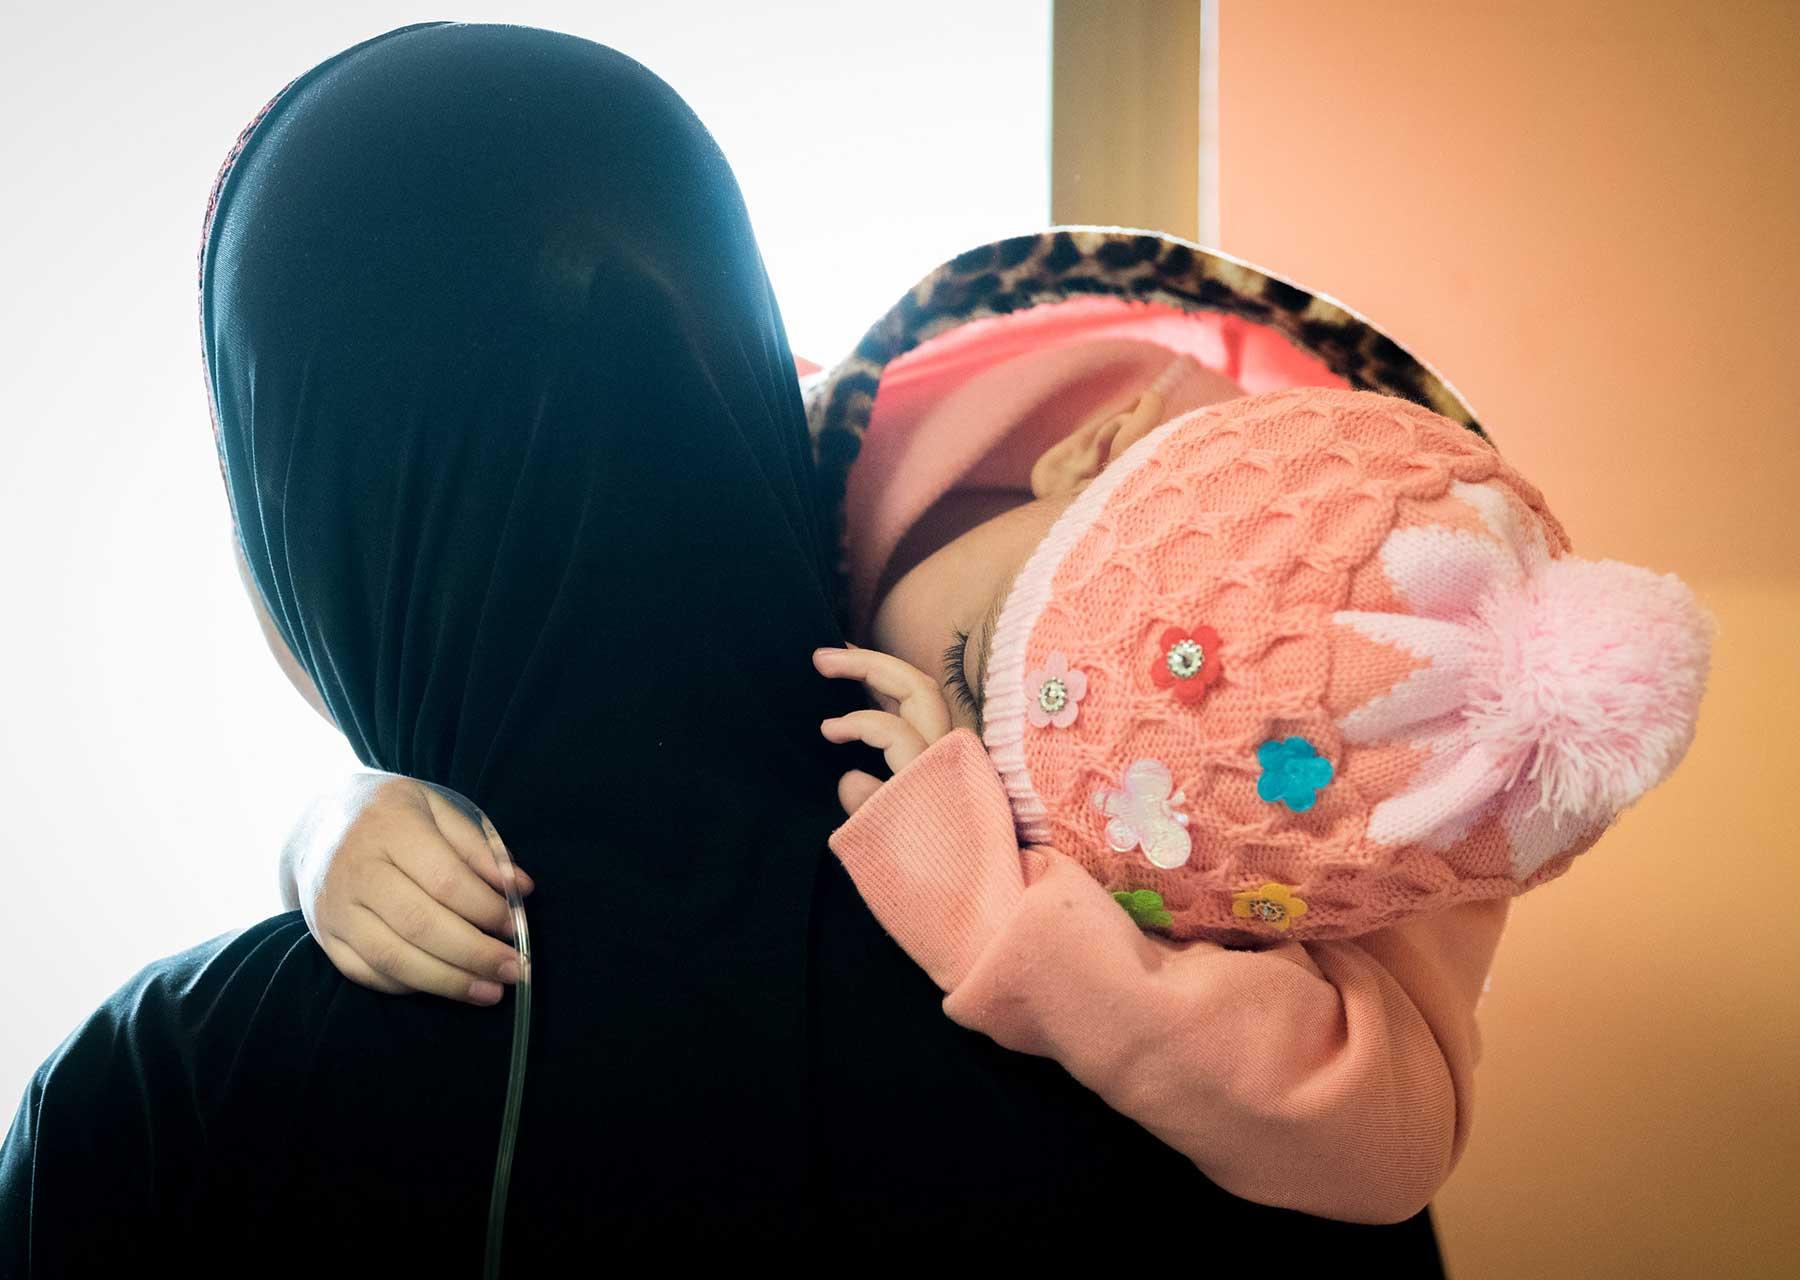 Archive image from 2020: A four year old cancer patient from Gaza at AVH, with her mother. The girl was treated for a brain tumor in 2020. Photo: LWF/ A. Hillert 